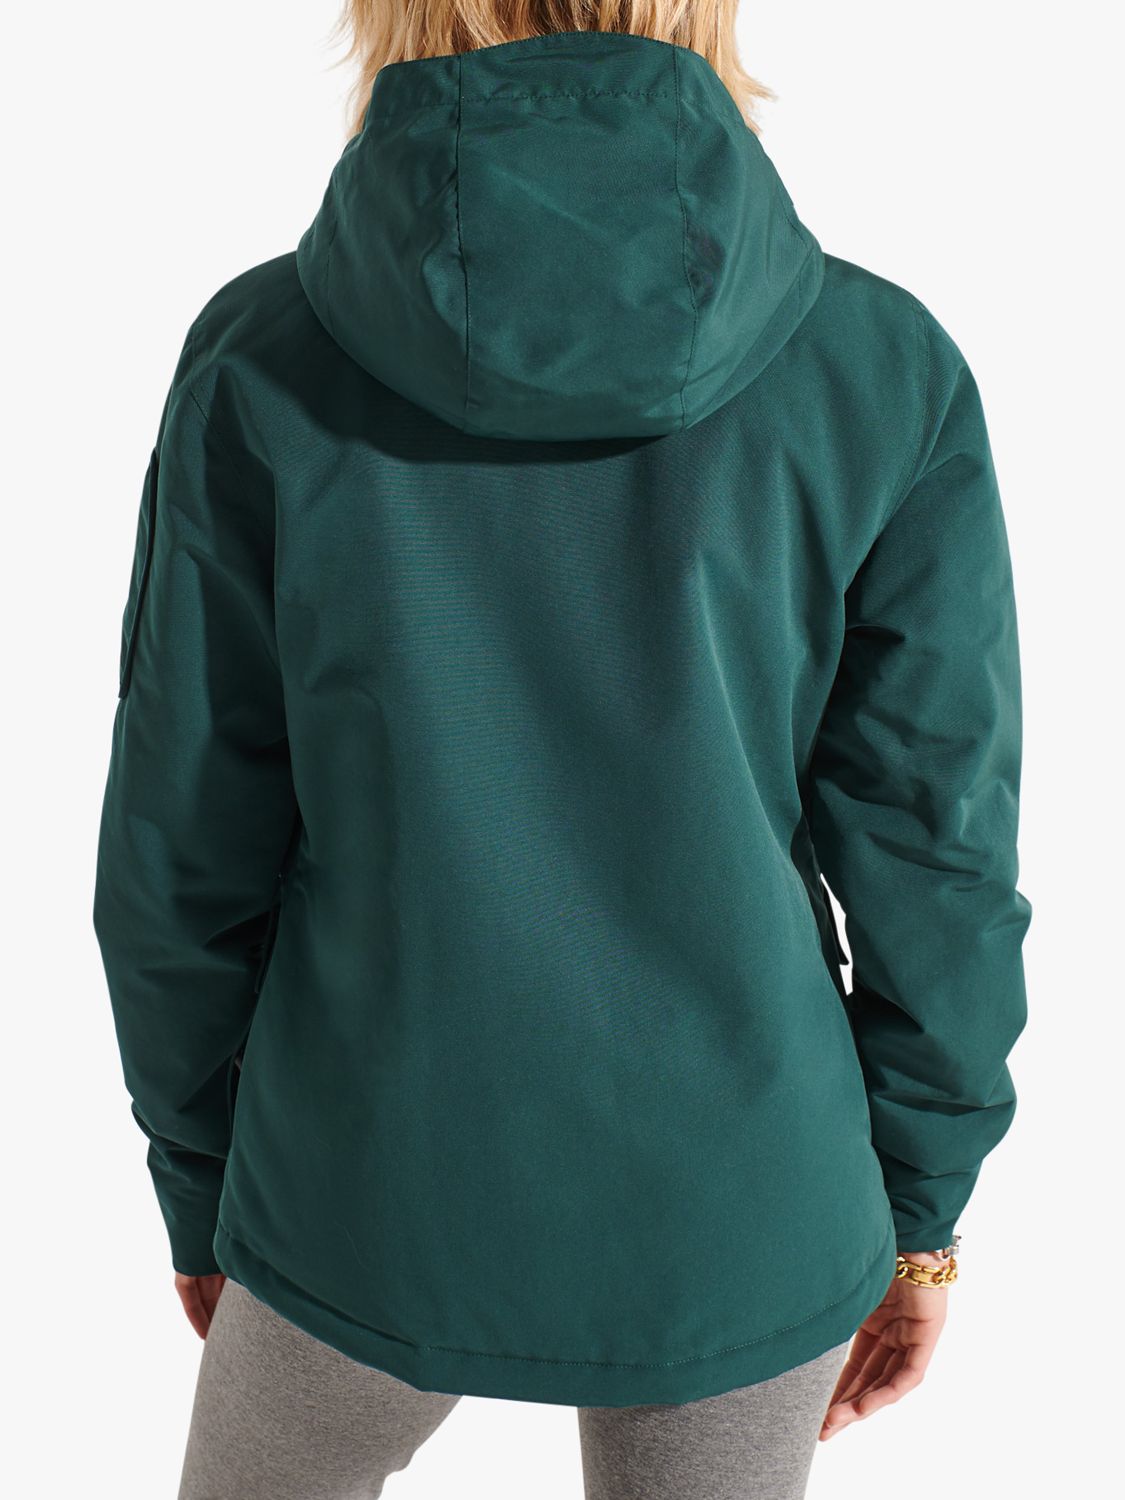 Superdry Ultimate SD Windcheater Jacket, Green at John Lewis & Partners